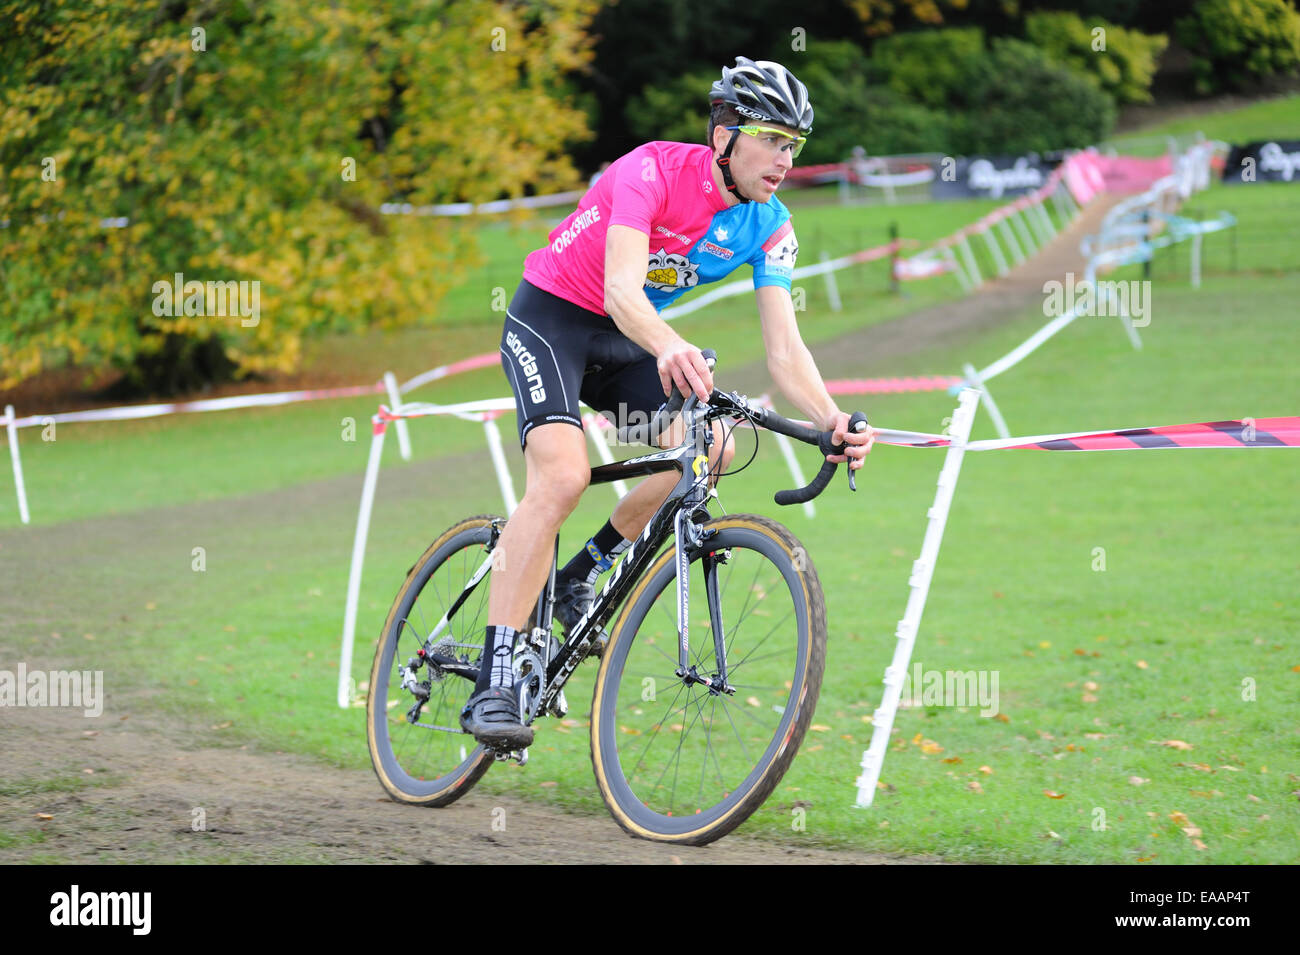 Competitor racing in a cyclocross race Stock Photo